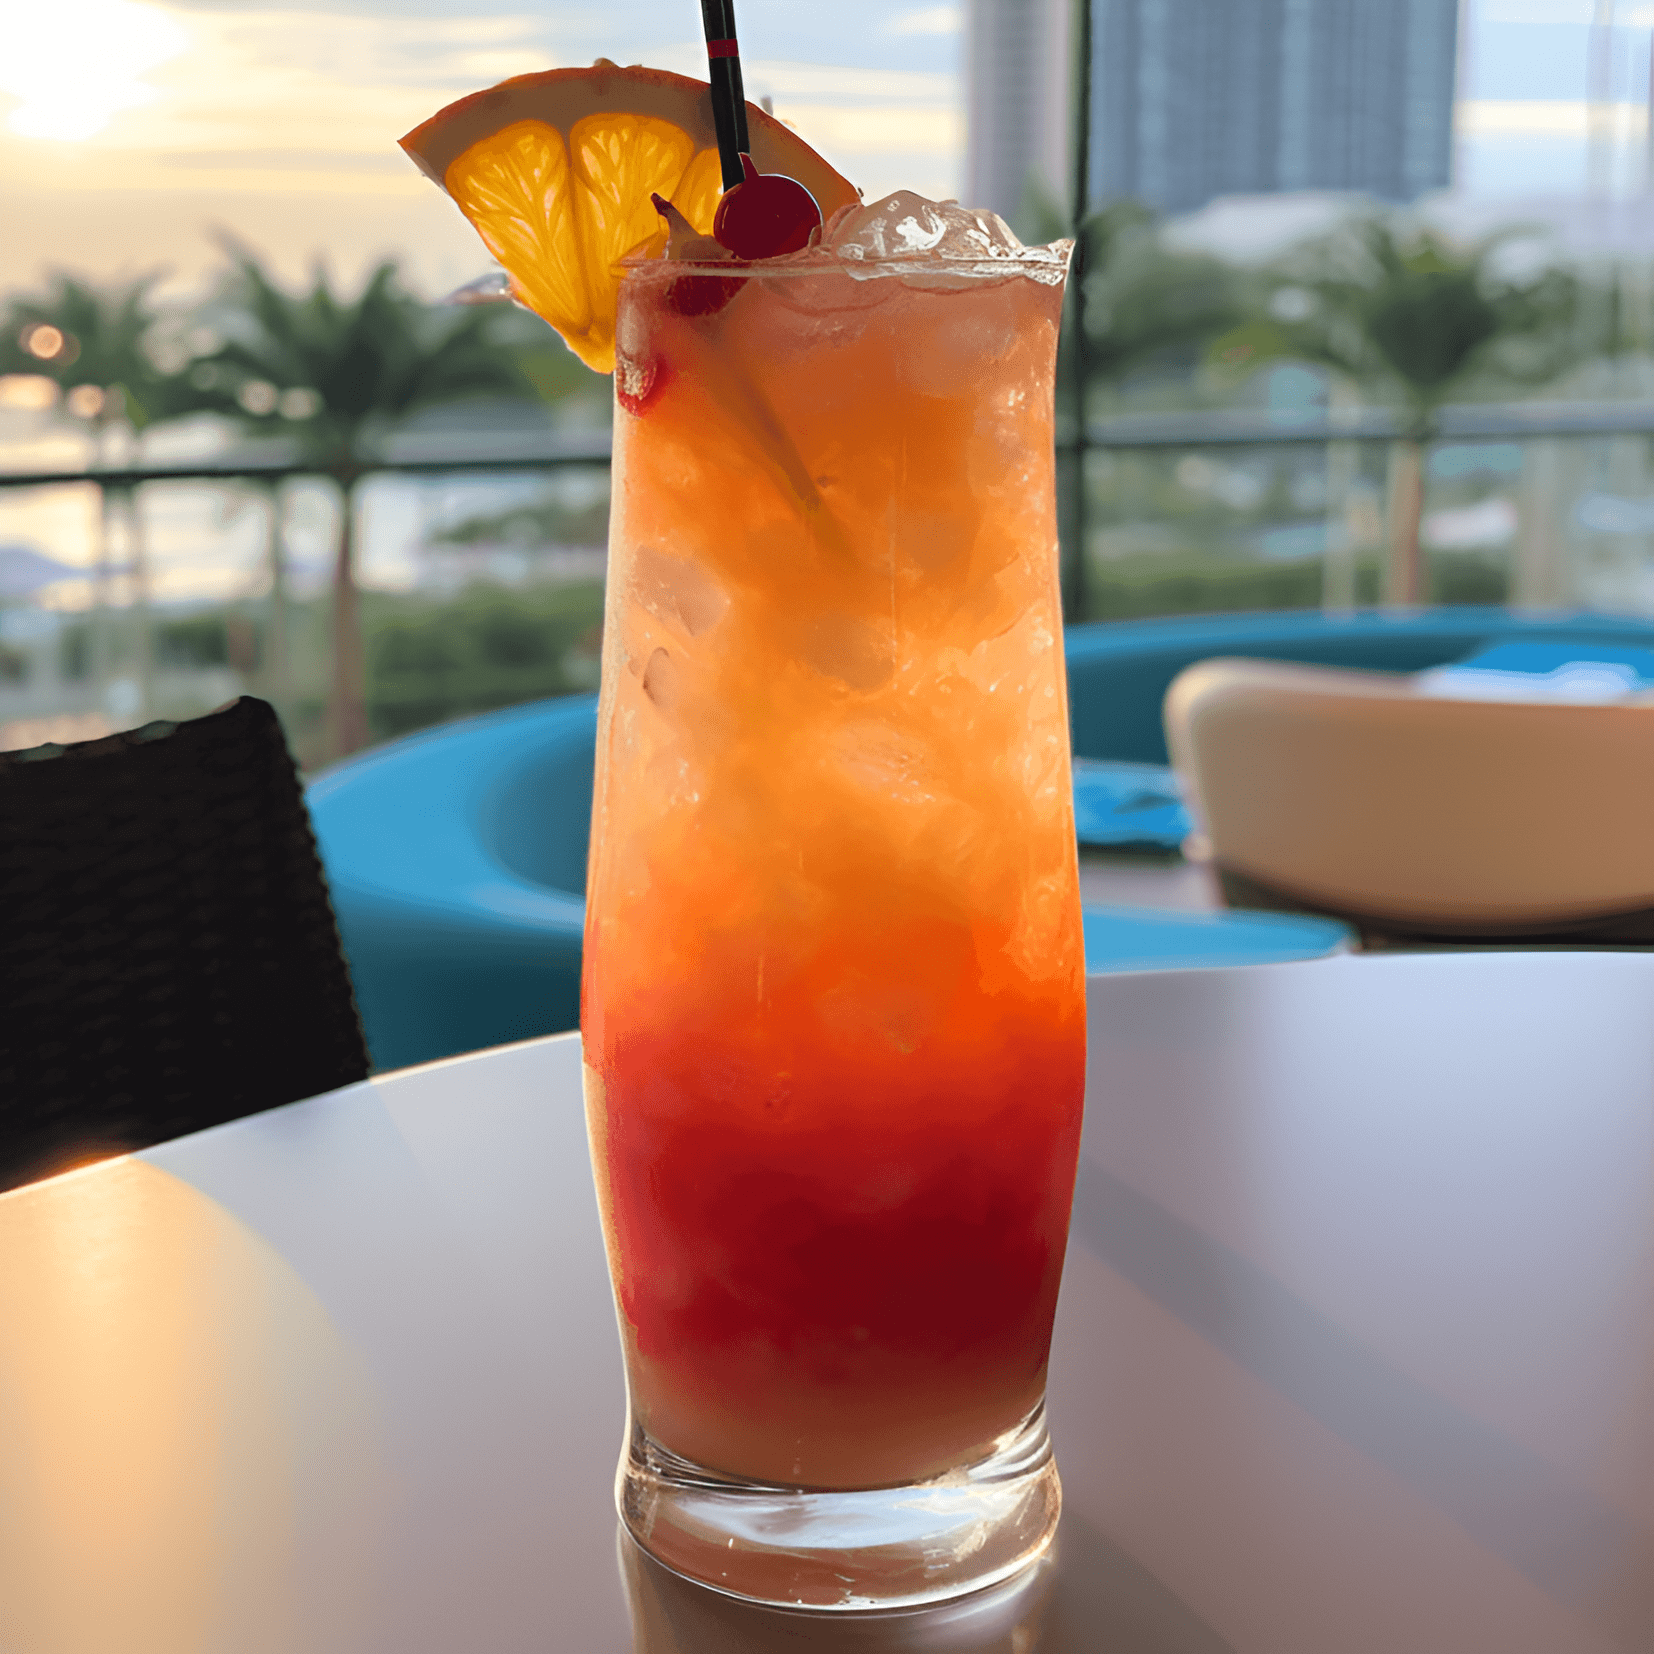 Fort Lauderdale Cocktail Recipe - The Fort Lauderdale cocktail has a fruity and tropical taste, with a hint of sweetness and a touch of sourness. The combination of orange, cranberry, and pineapple juices creates a refreshing and well-balanced flavor profile. The vodka adds a subtle kick, making this cocktail both light and invigorating.